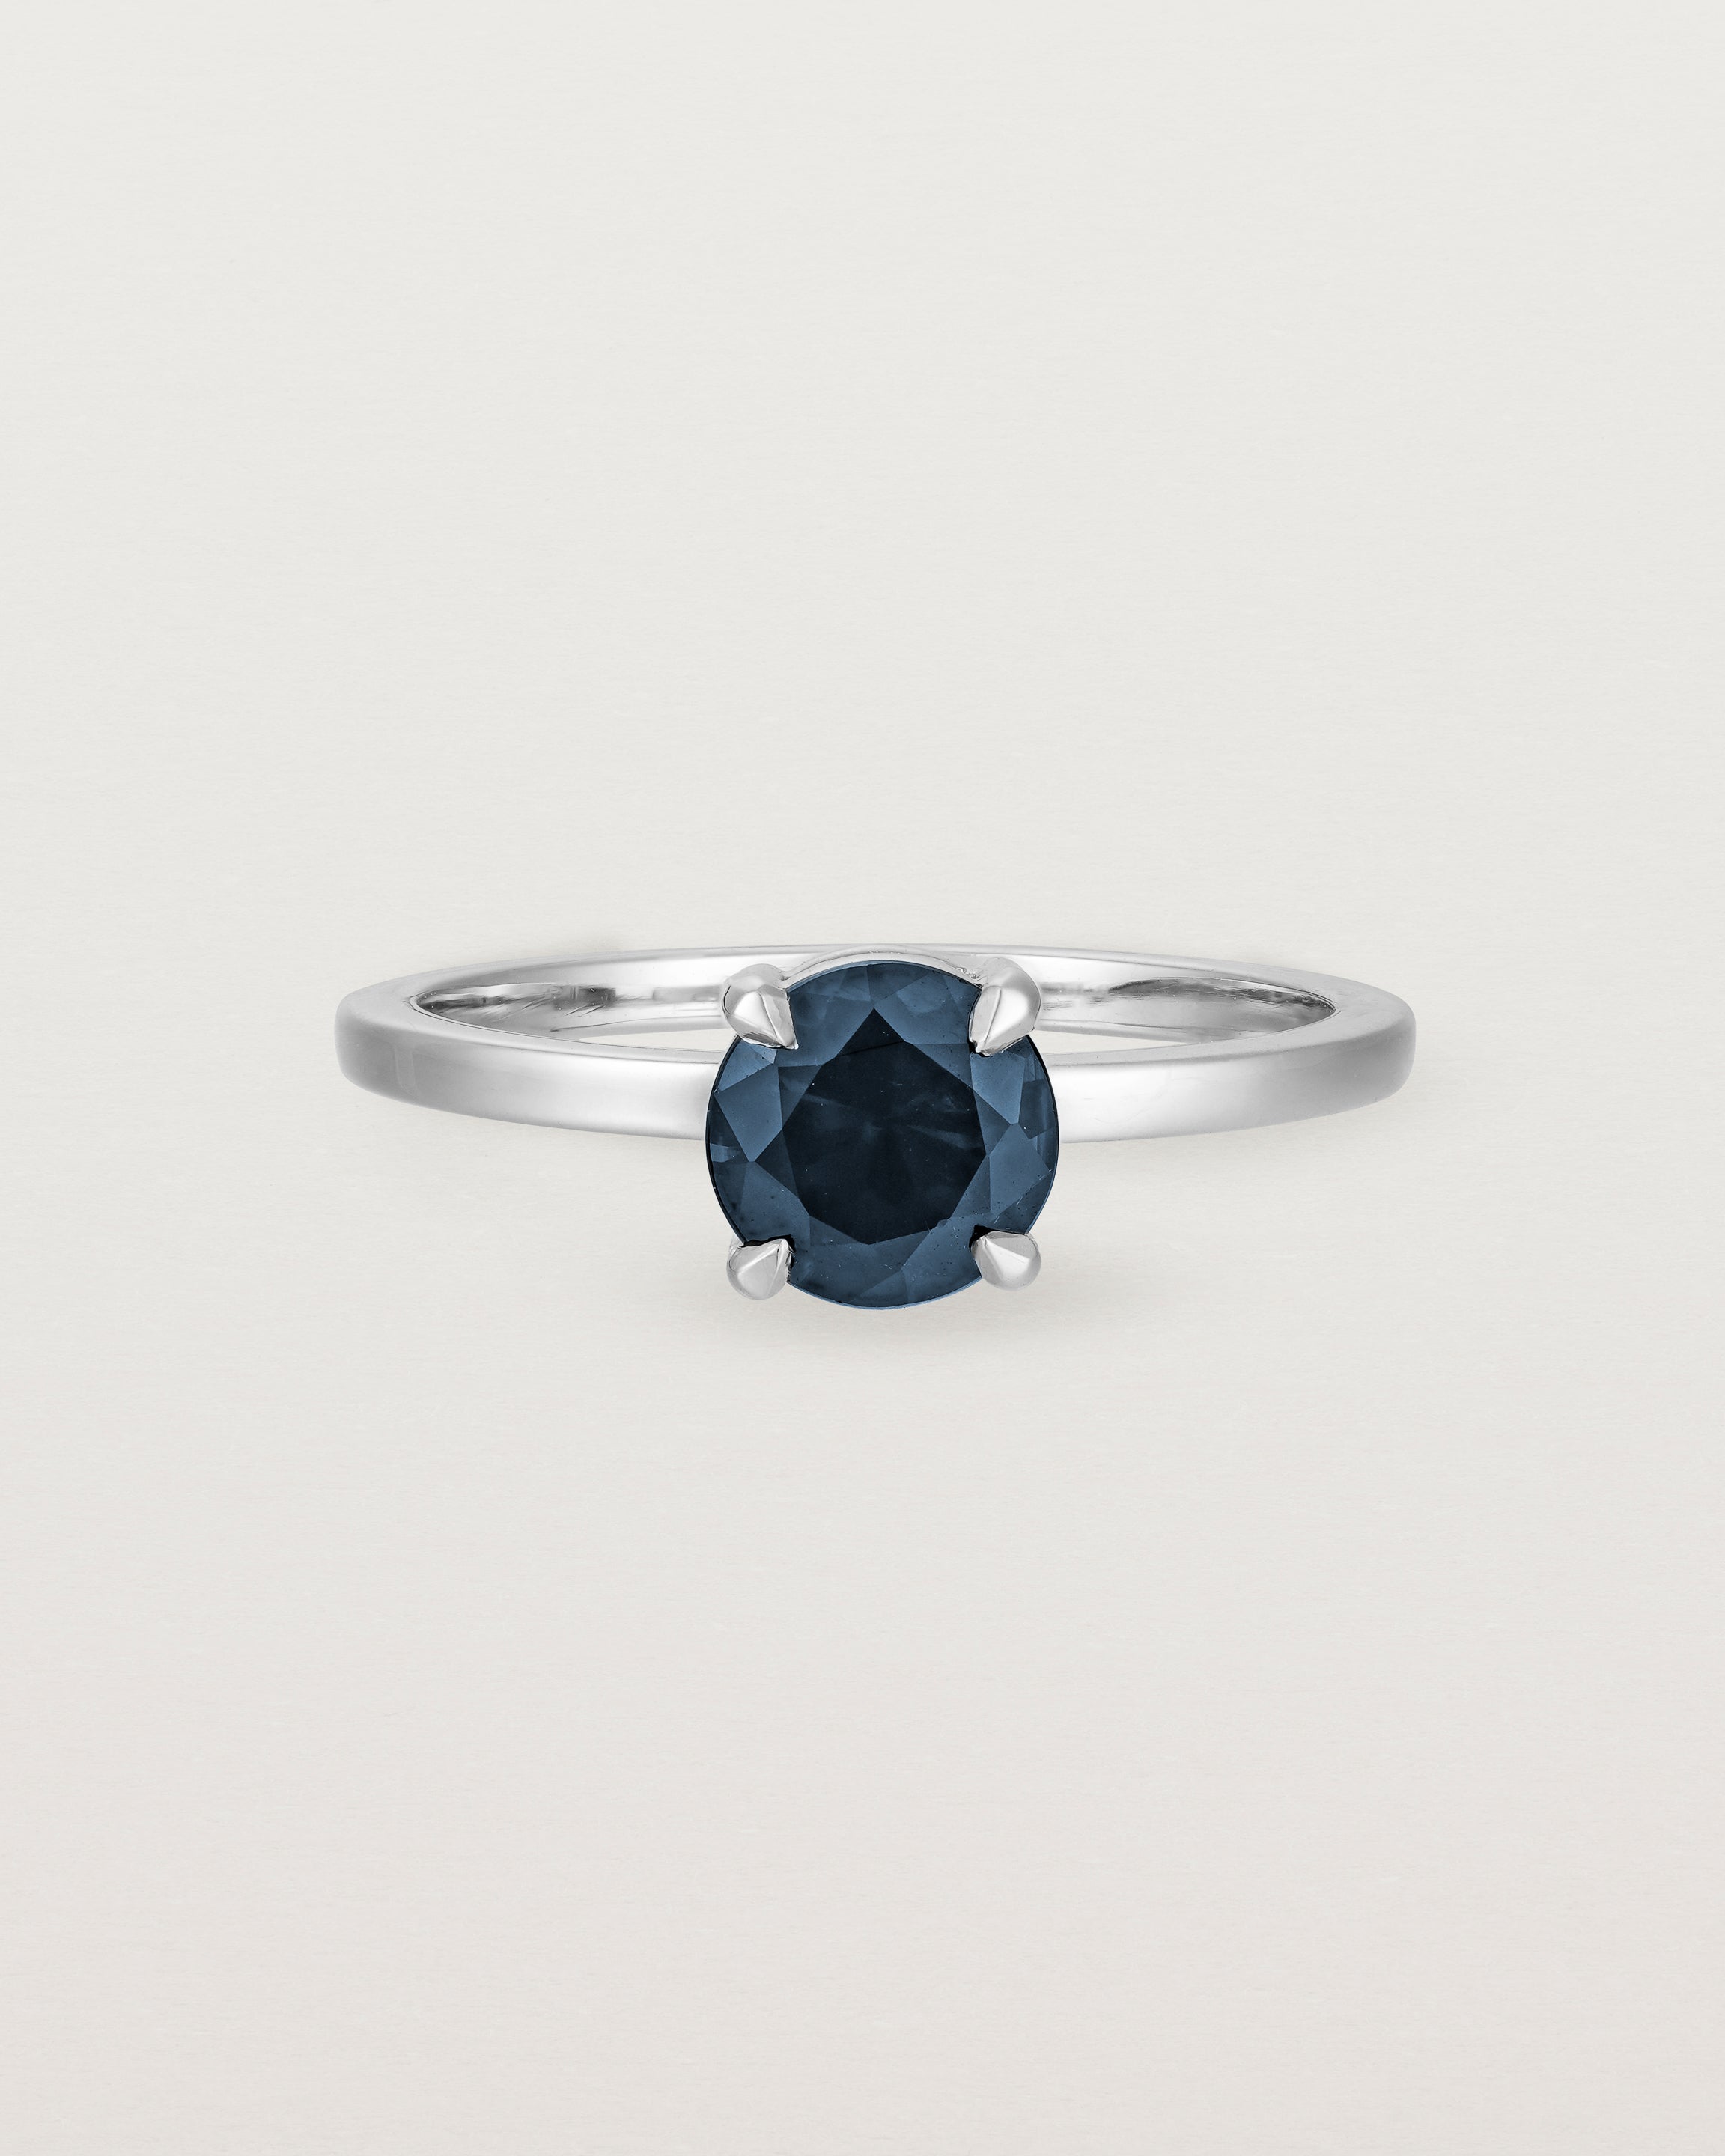 Front view of the Petite Una Round Solitaire | Australian Sapphire | White Gold.